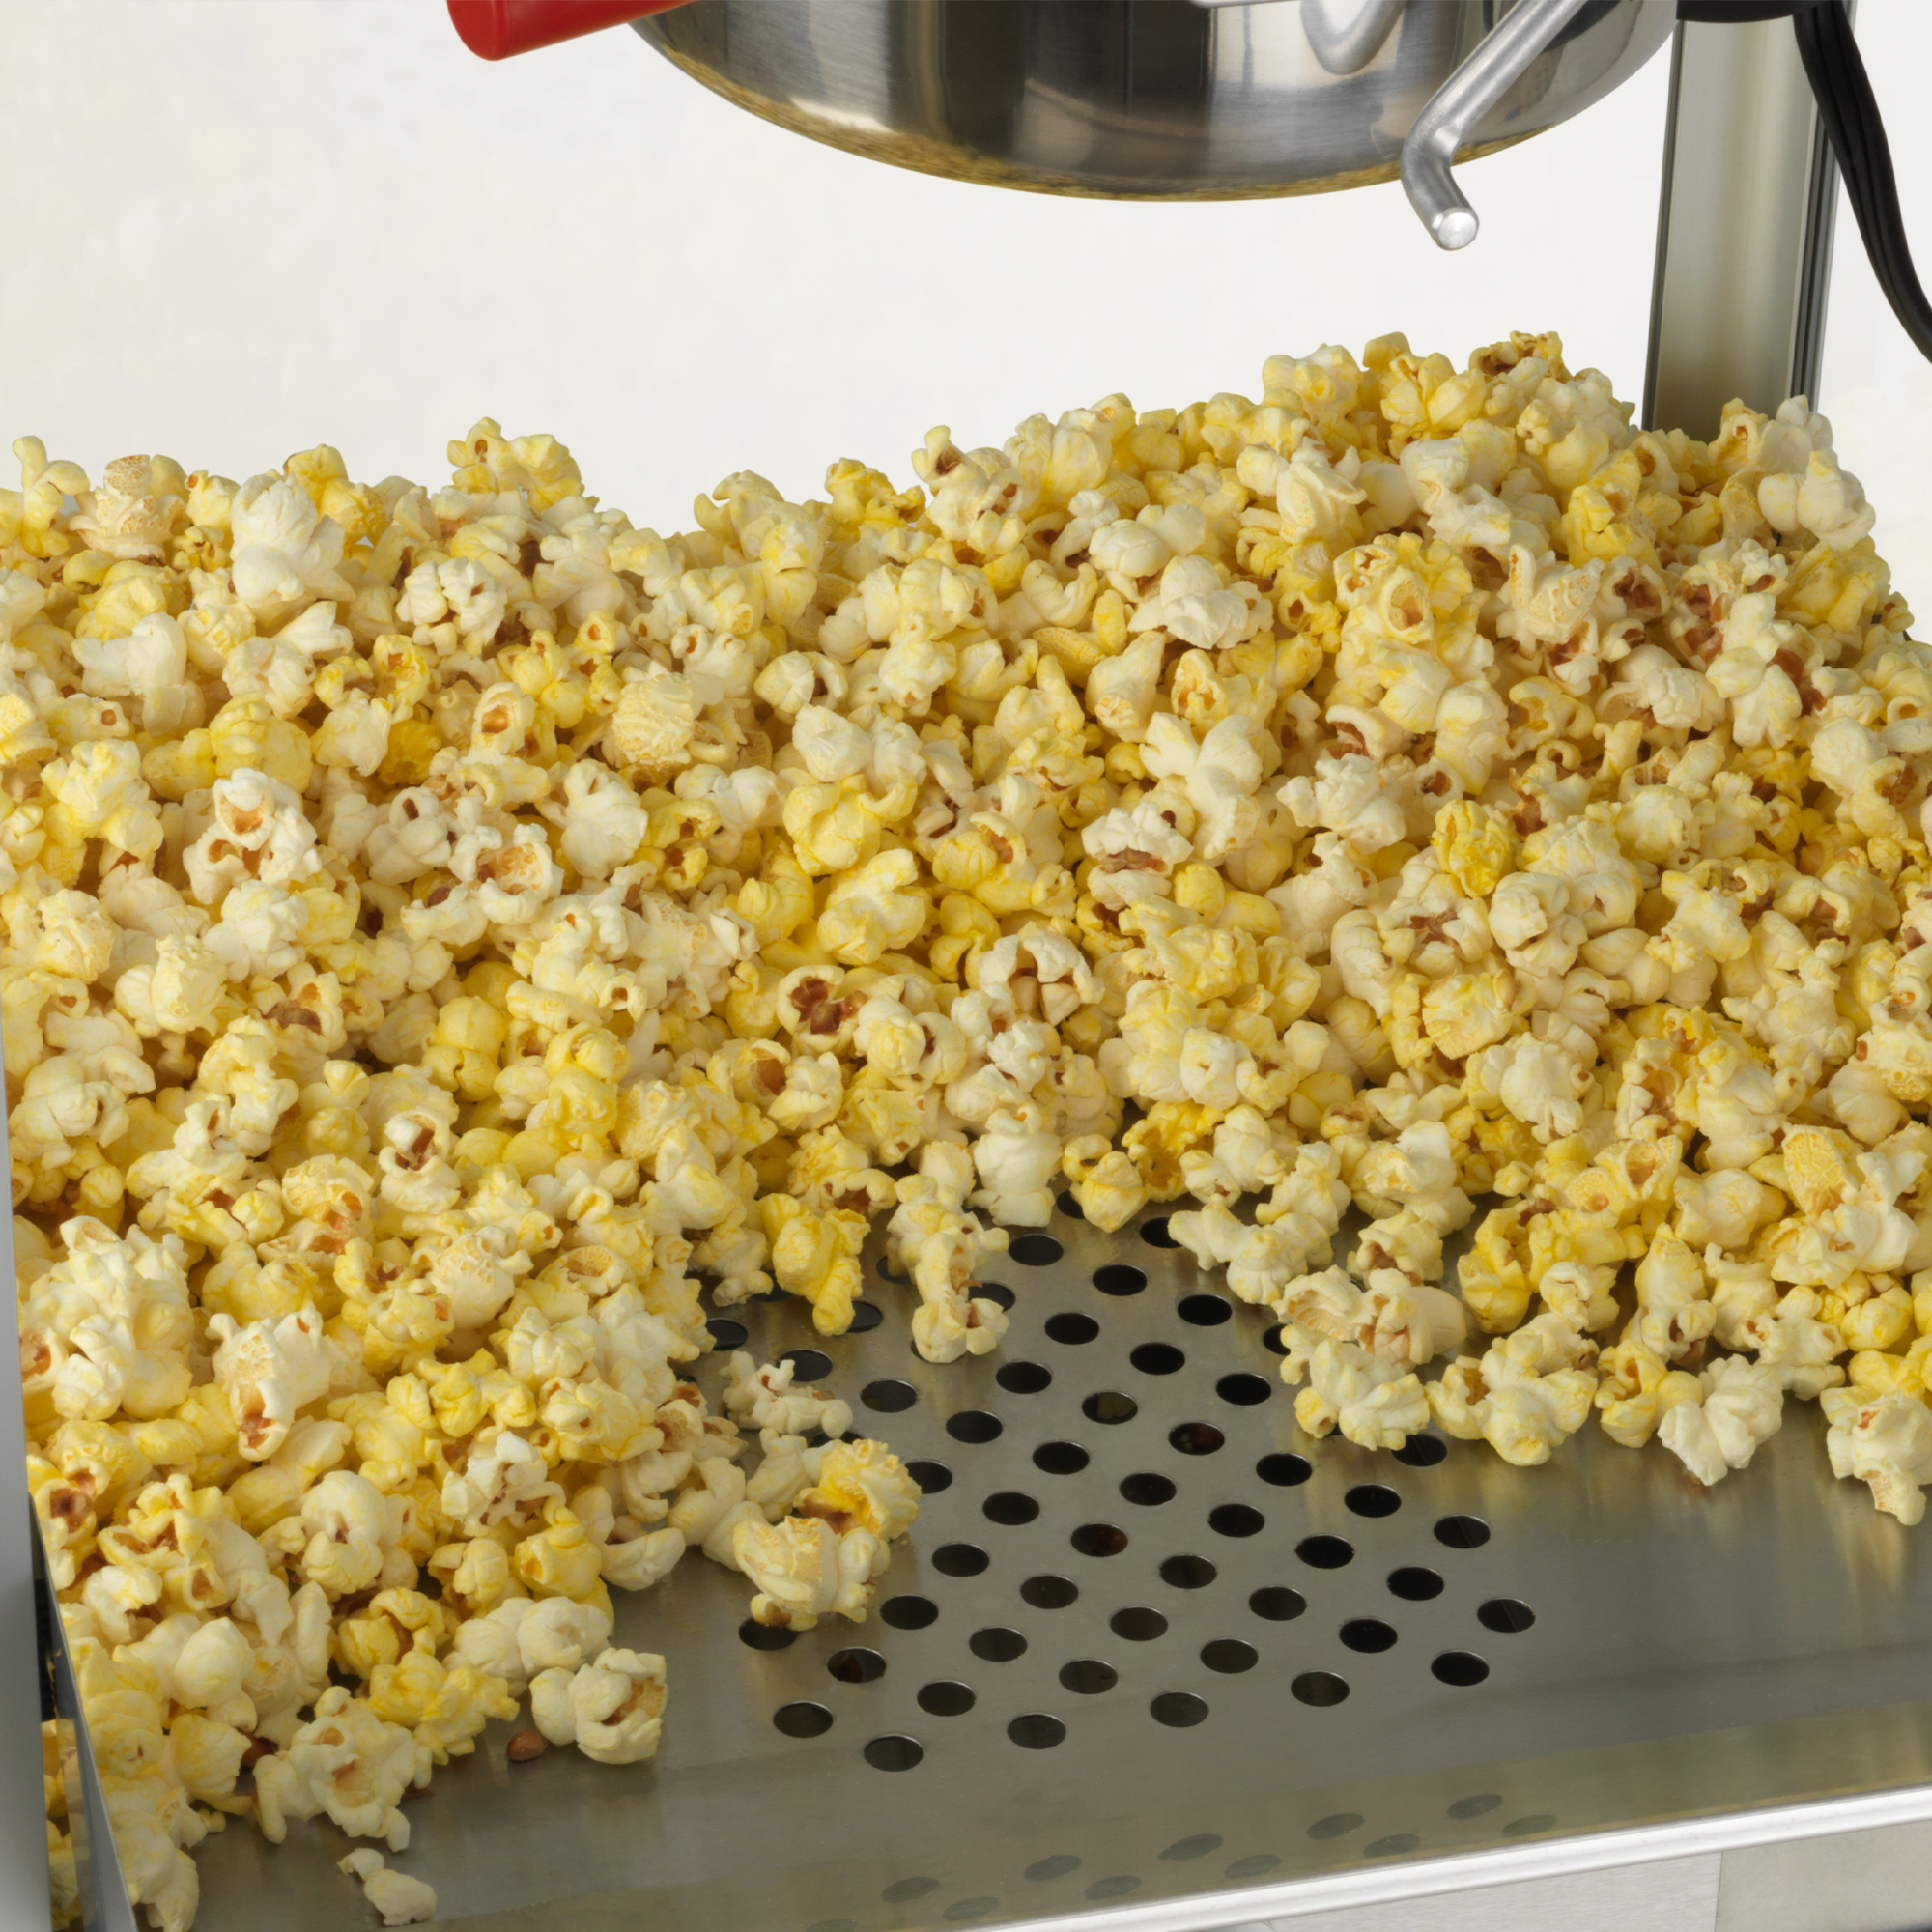 Popcorn And The Hot Air Popper – FlatbreadGarden